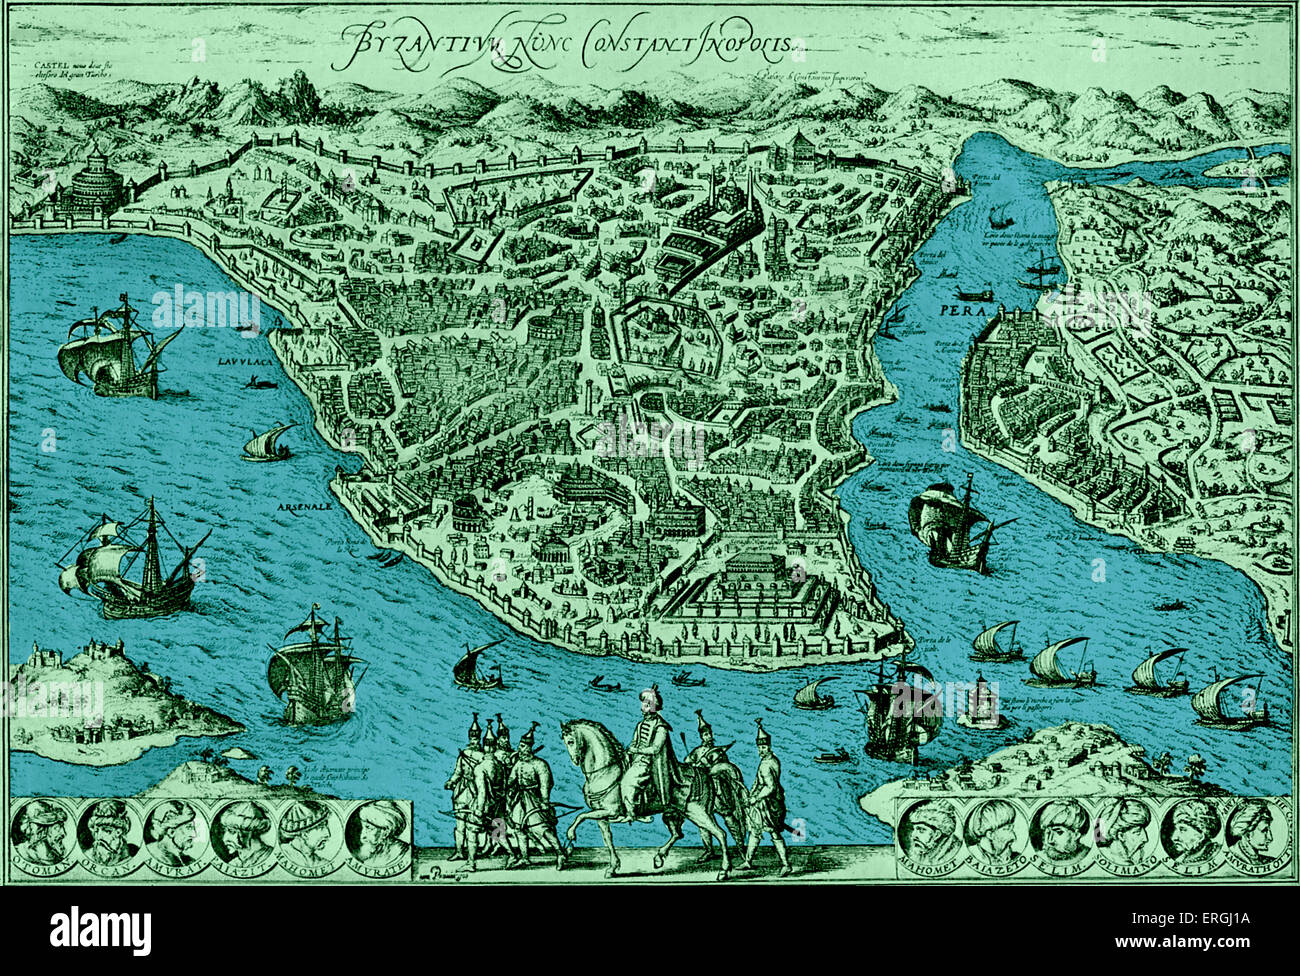 Map of Constantinople - in 'Civitas Oreis Terrarum' by Braun and Hogenberg. Book 1: 1574 - 1618. Modern day Istanbul, Turkey. Stock Photo